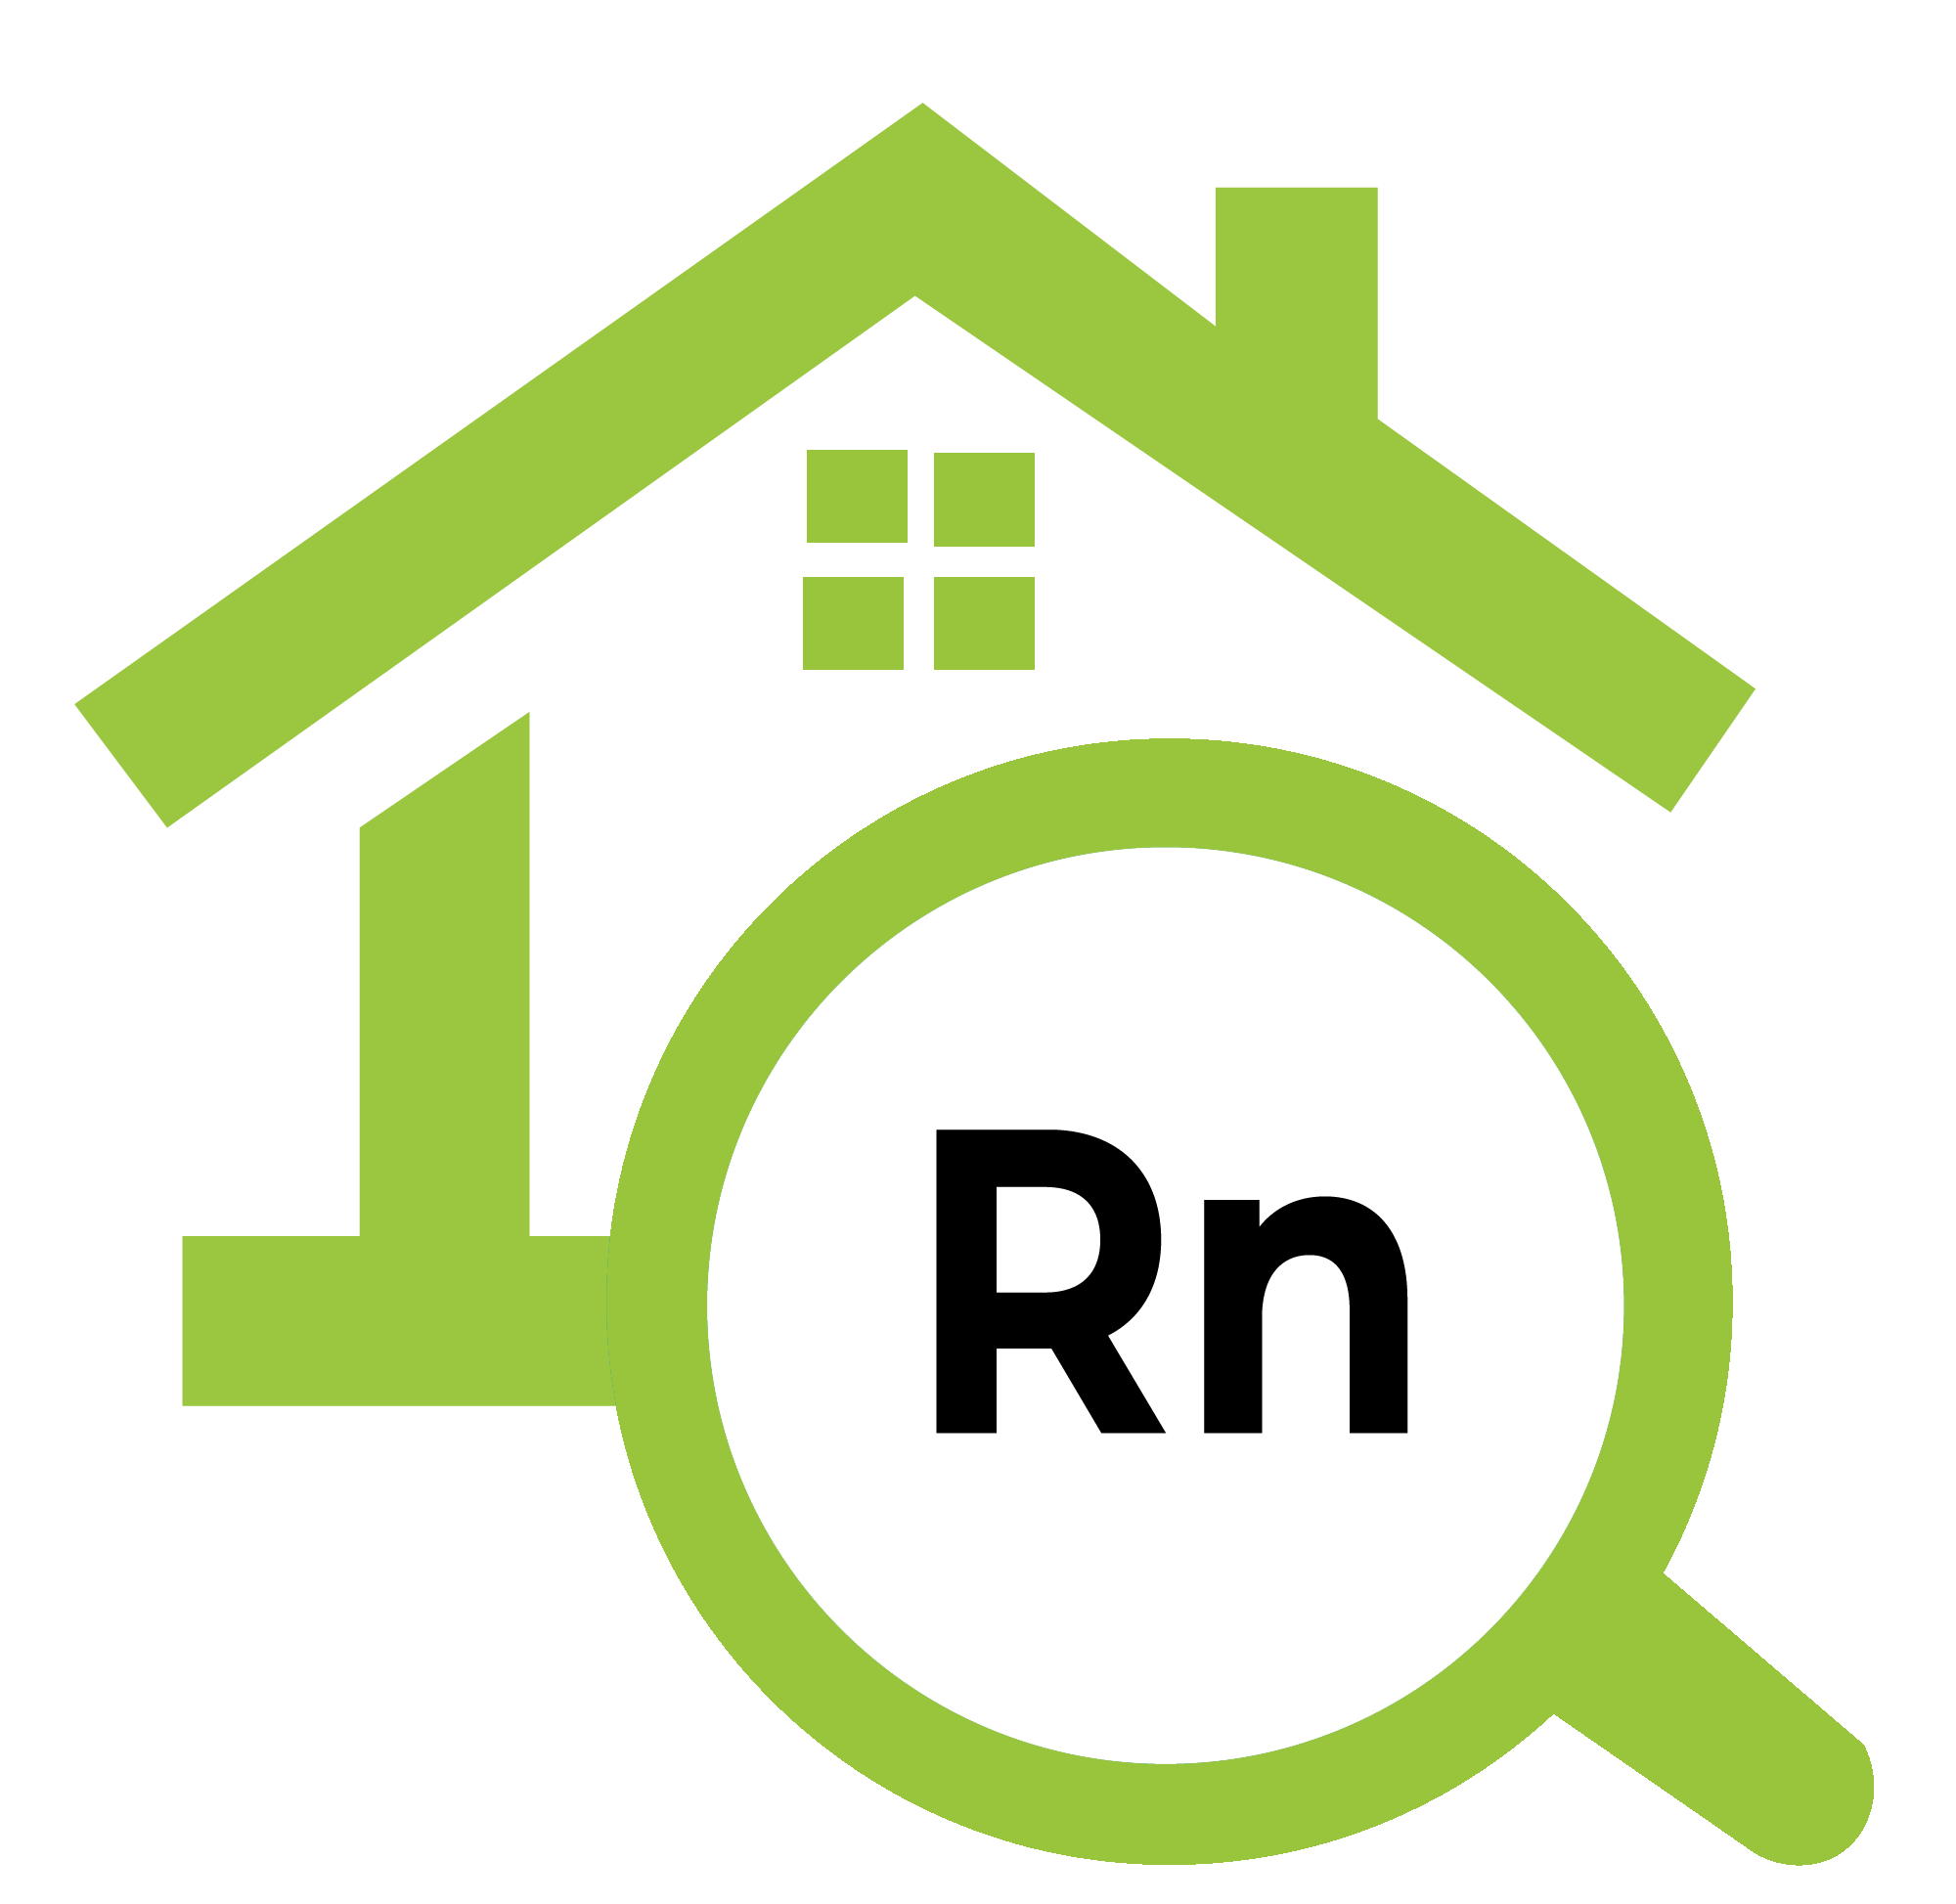 radon testing warning with home and magnifying glass